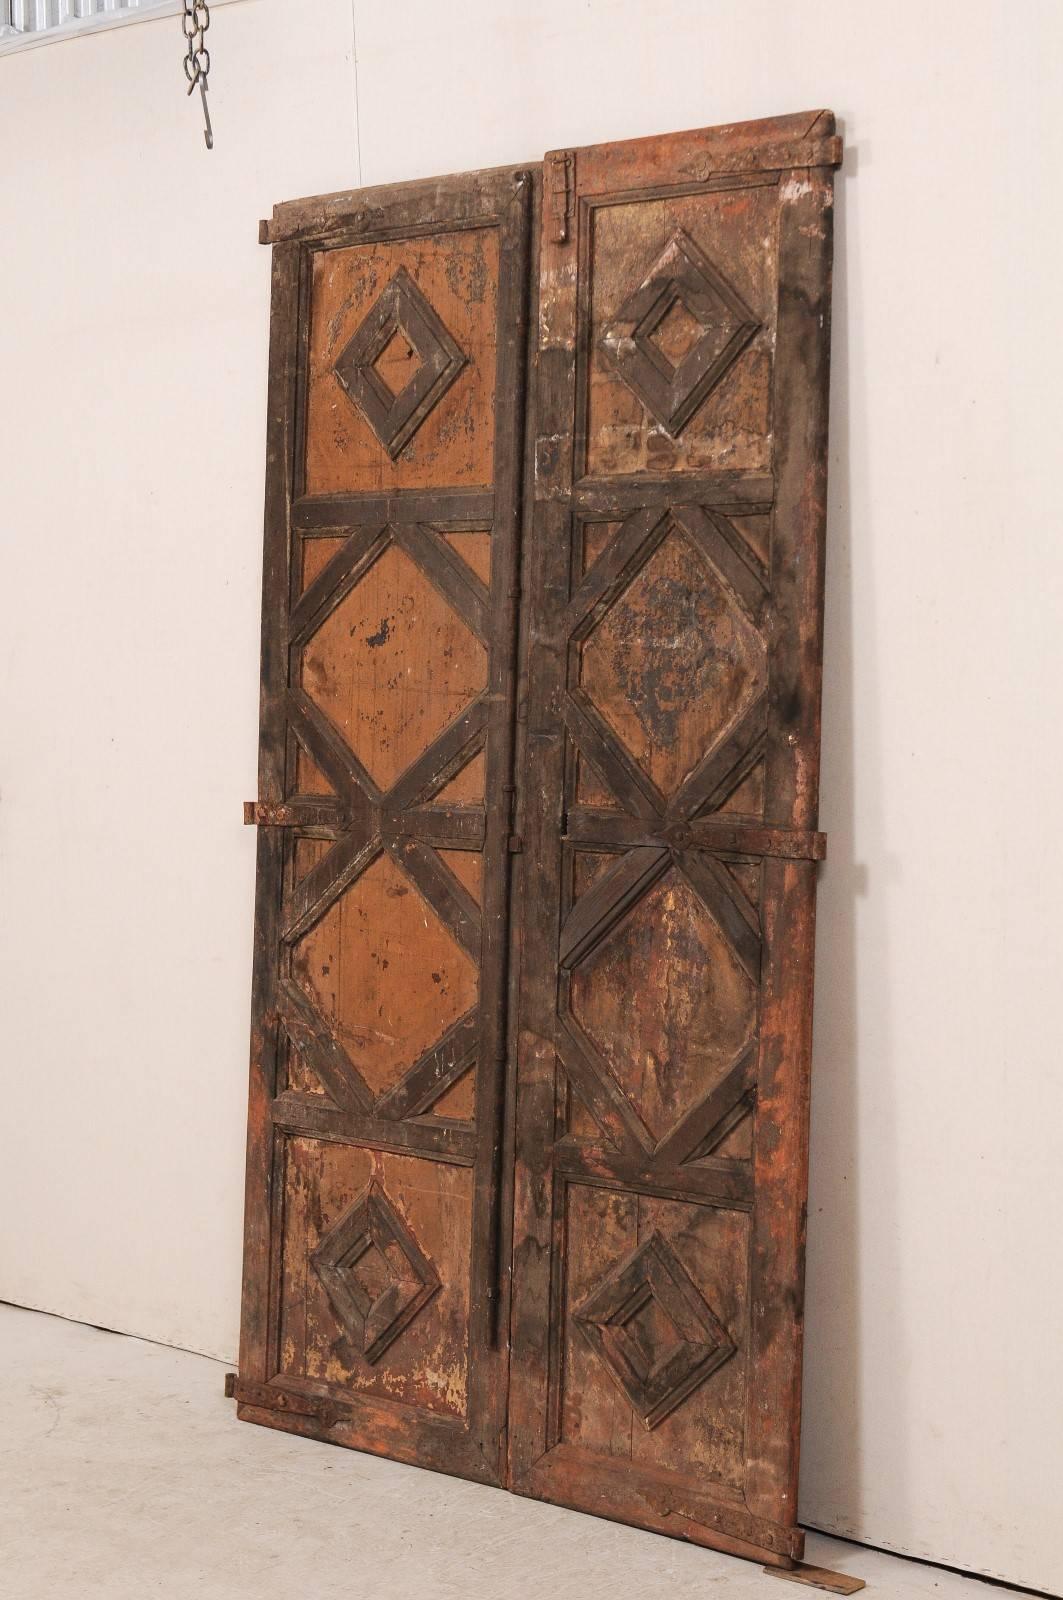 A pair of 18th century Spanish wood doors. This pair of antique Spanish doors feature recess panels on their front sides, thickly molded, creating a vertically lined diamond pattern. The doors retain their old iron hardware, paint and finish, which